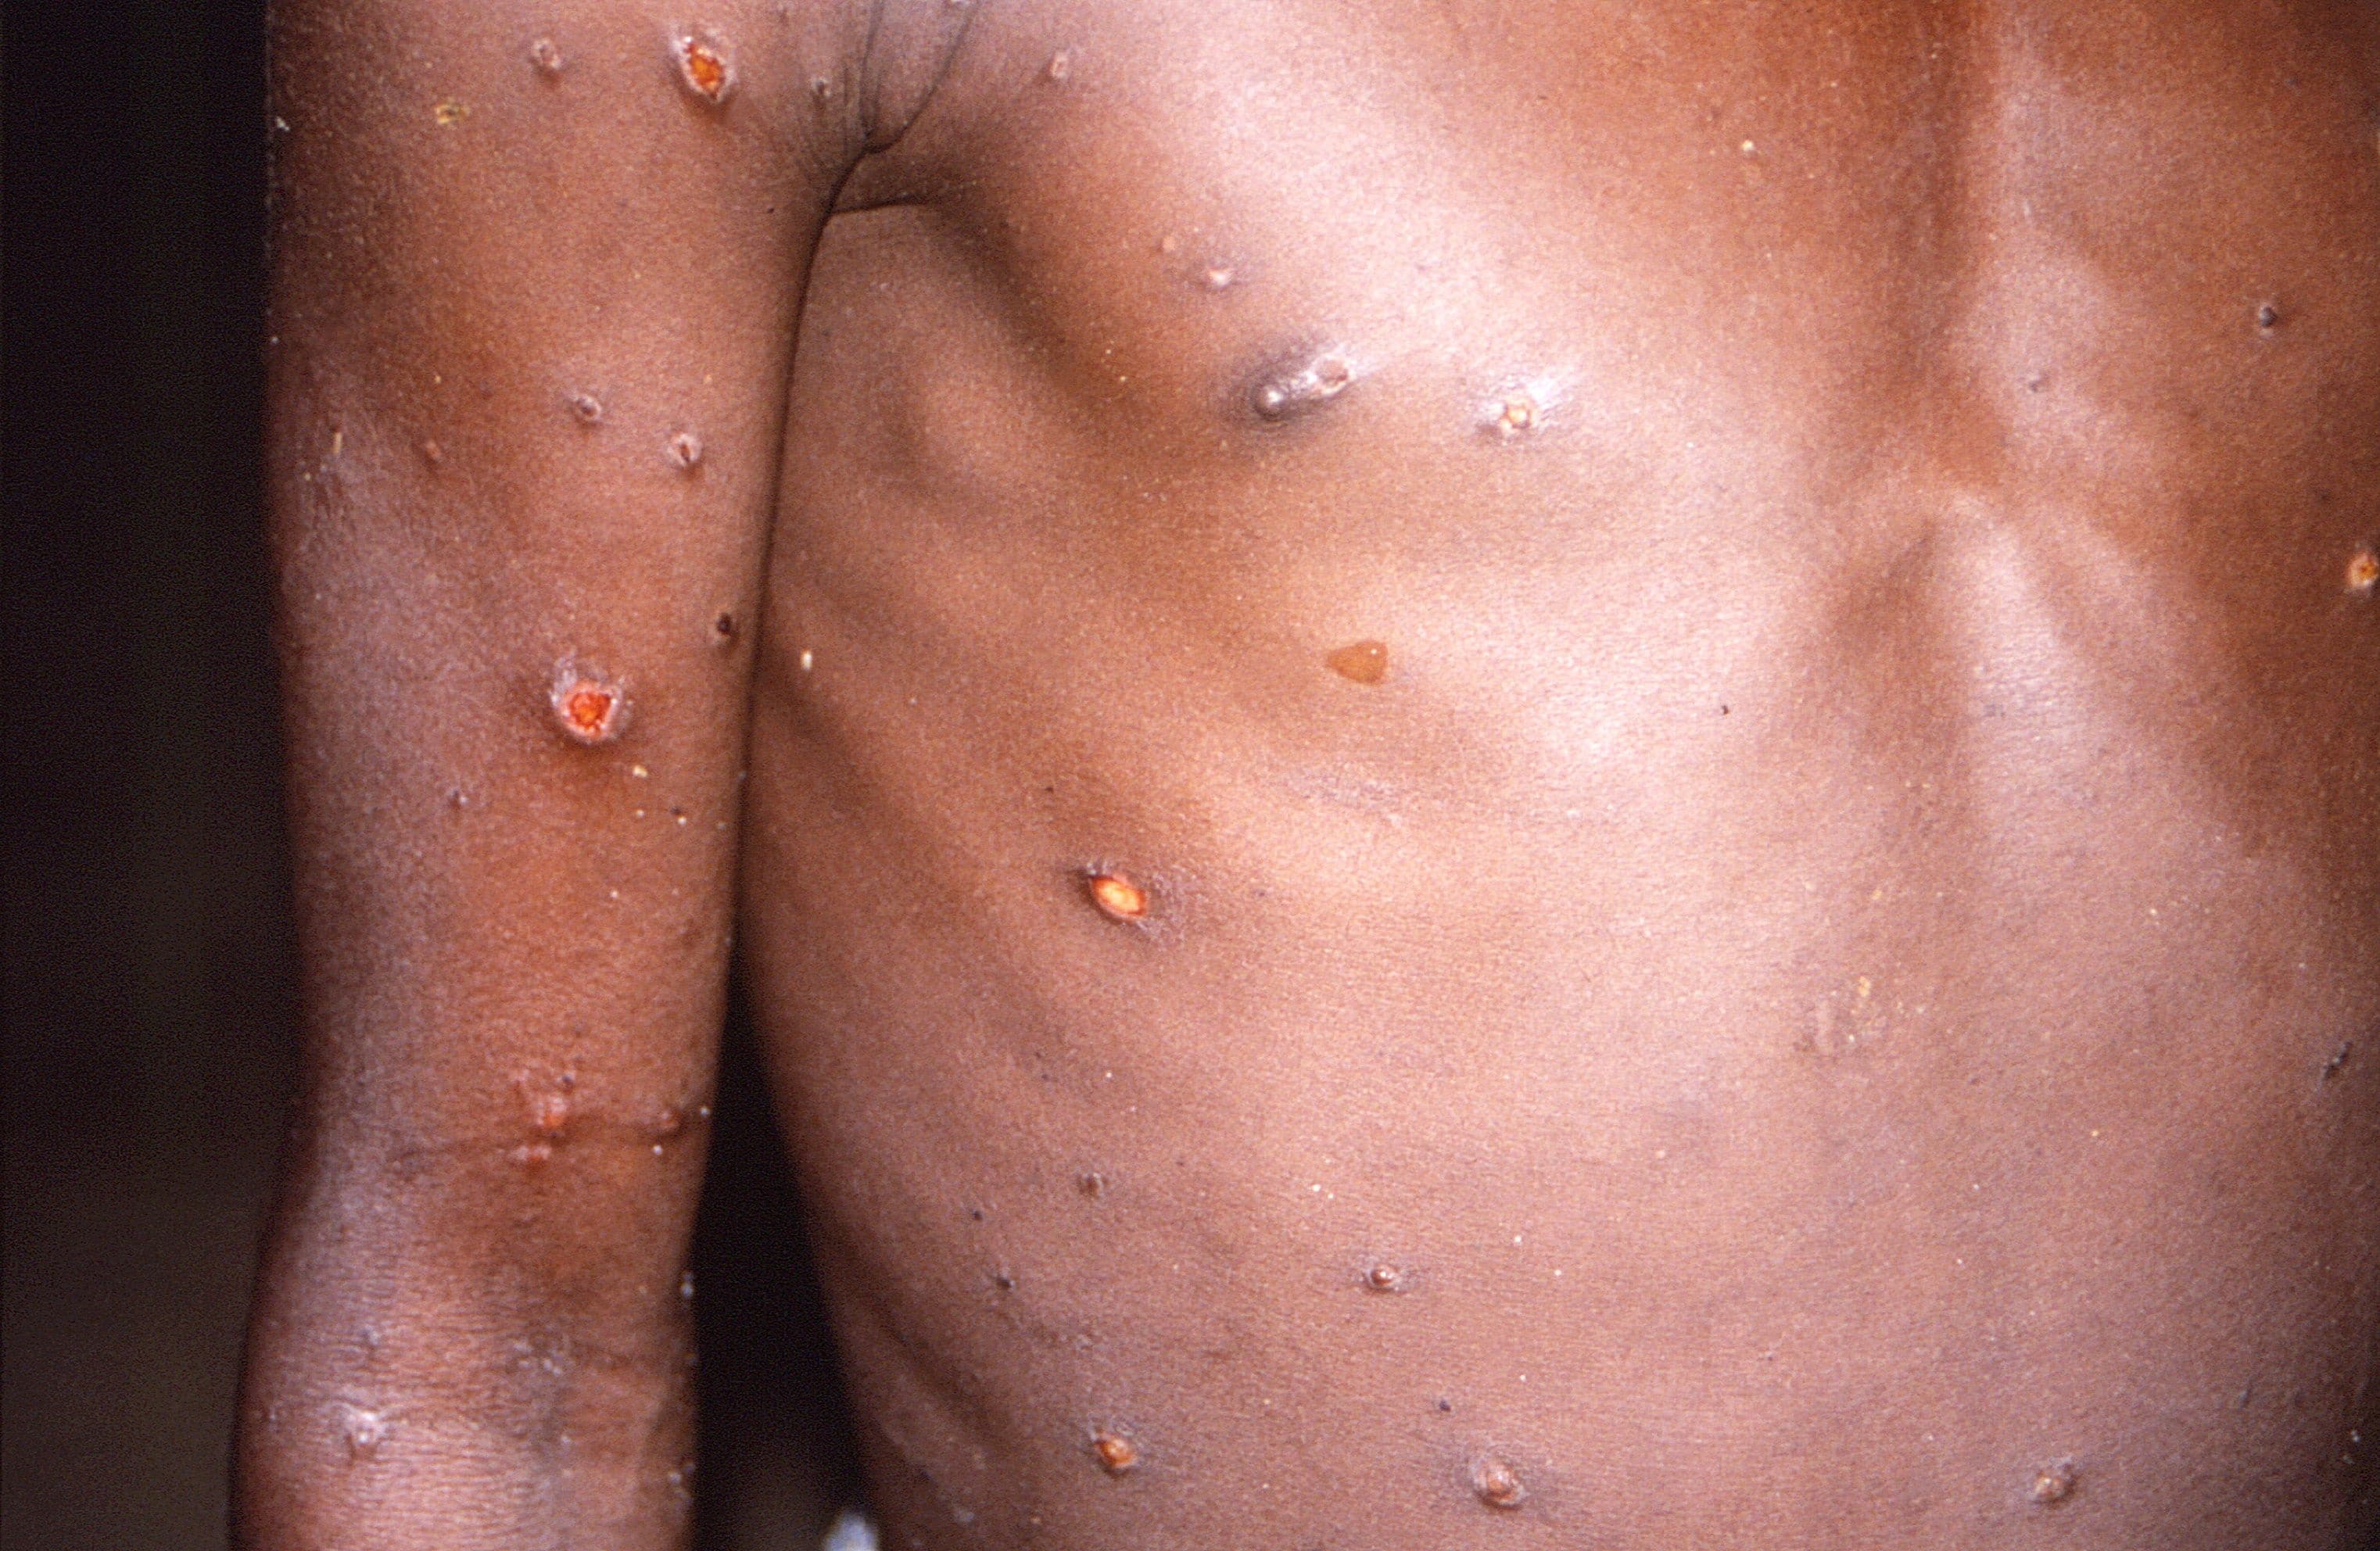 Monkeypox outbreak: WHO warns as disease spreads to 12 countries